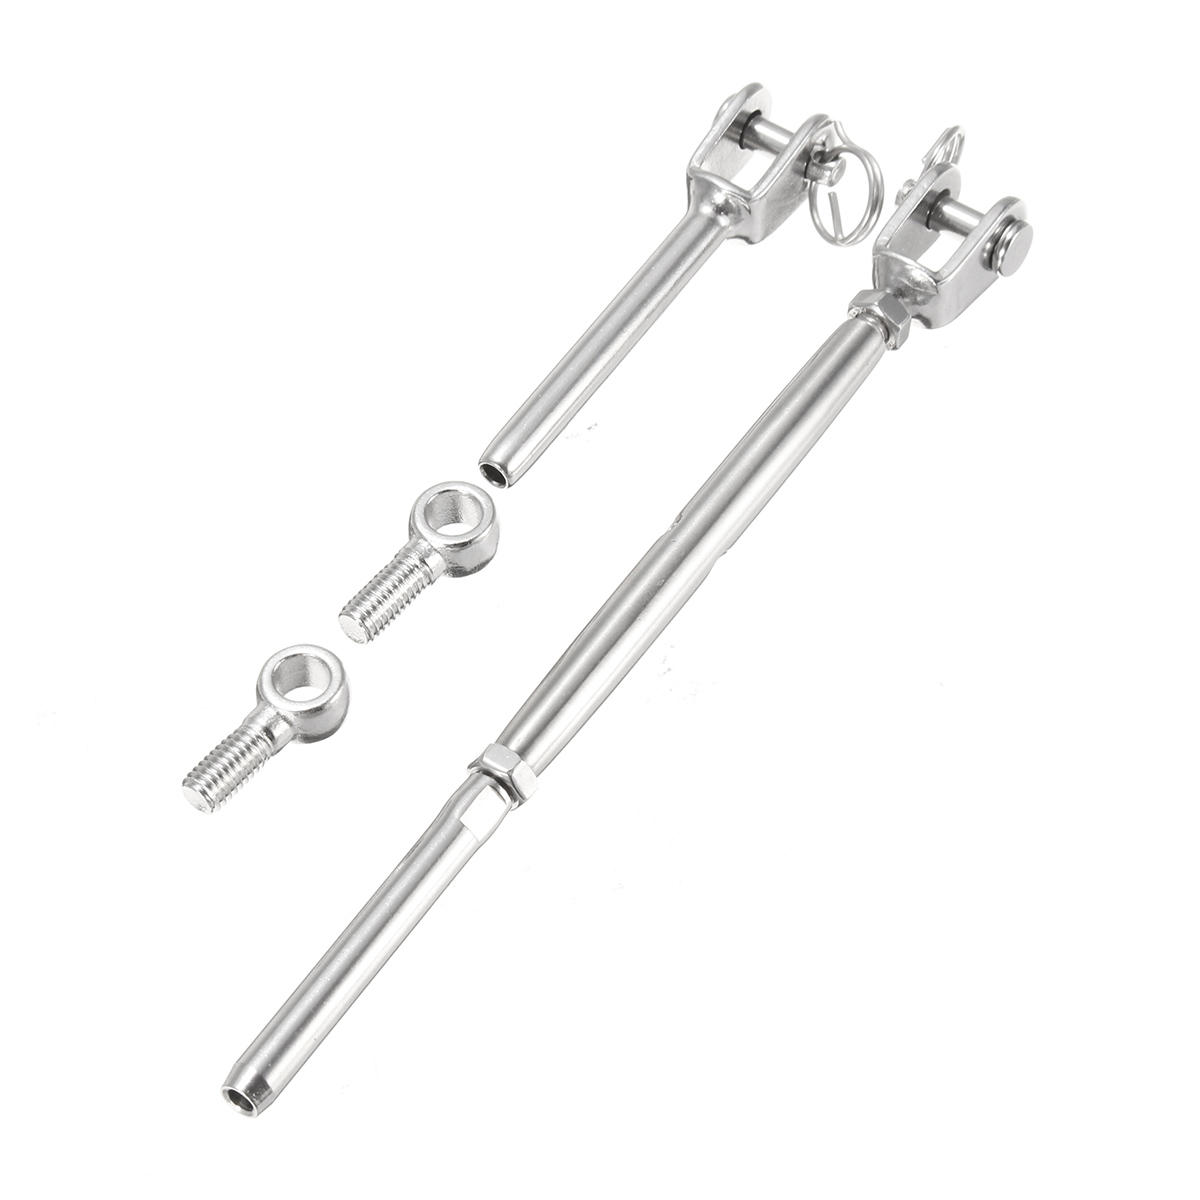 Balustrade KIt Stainless Steel Jaw/Jaw Turnbuckle Eye Screw choose your qty